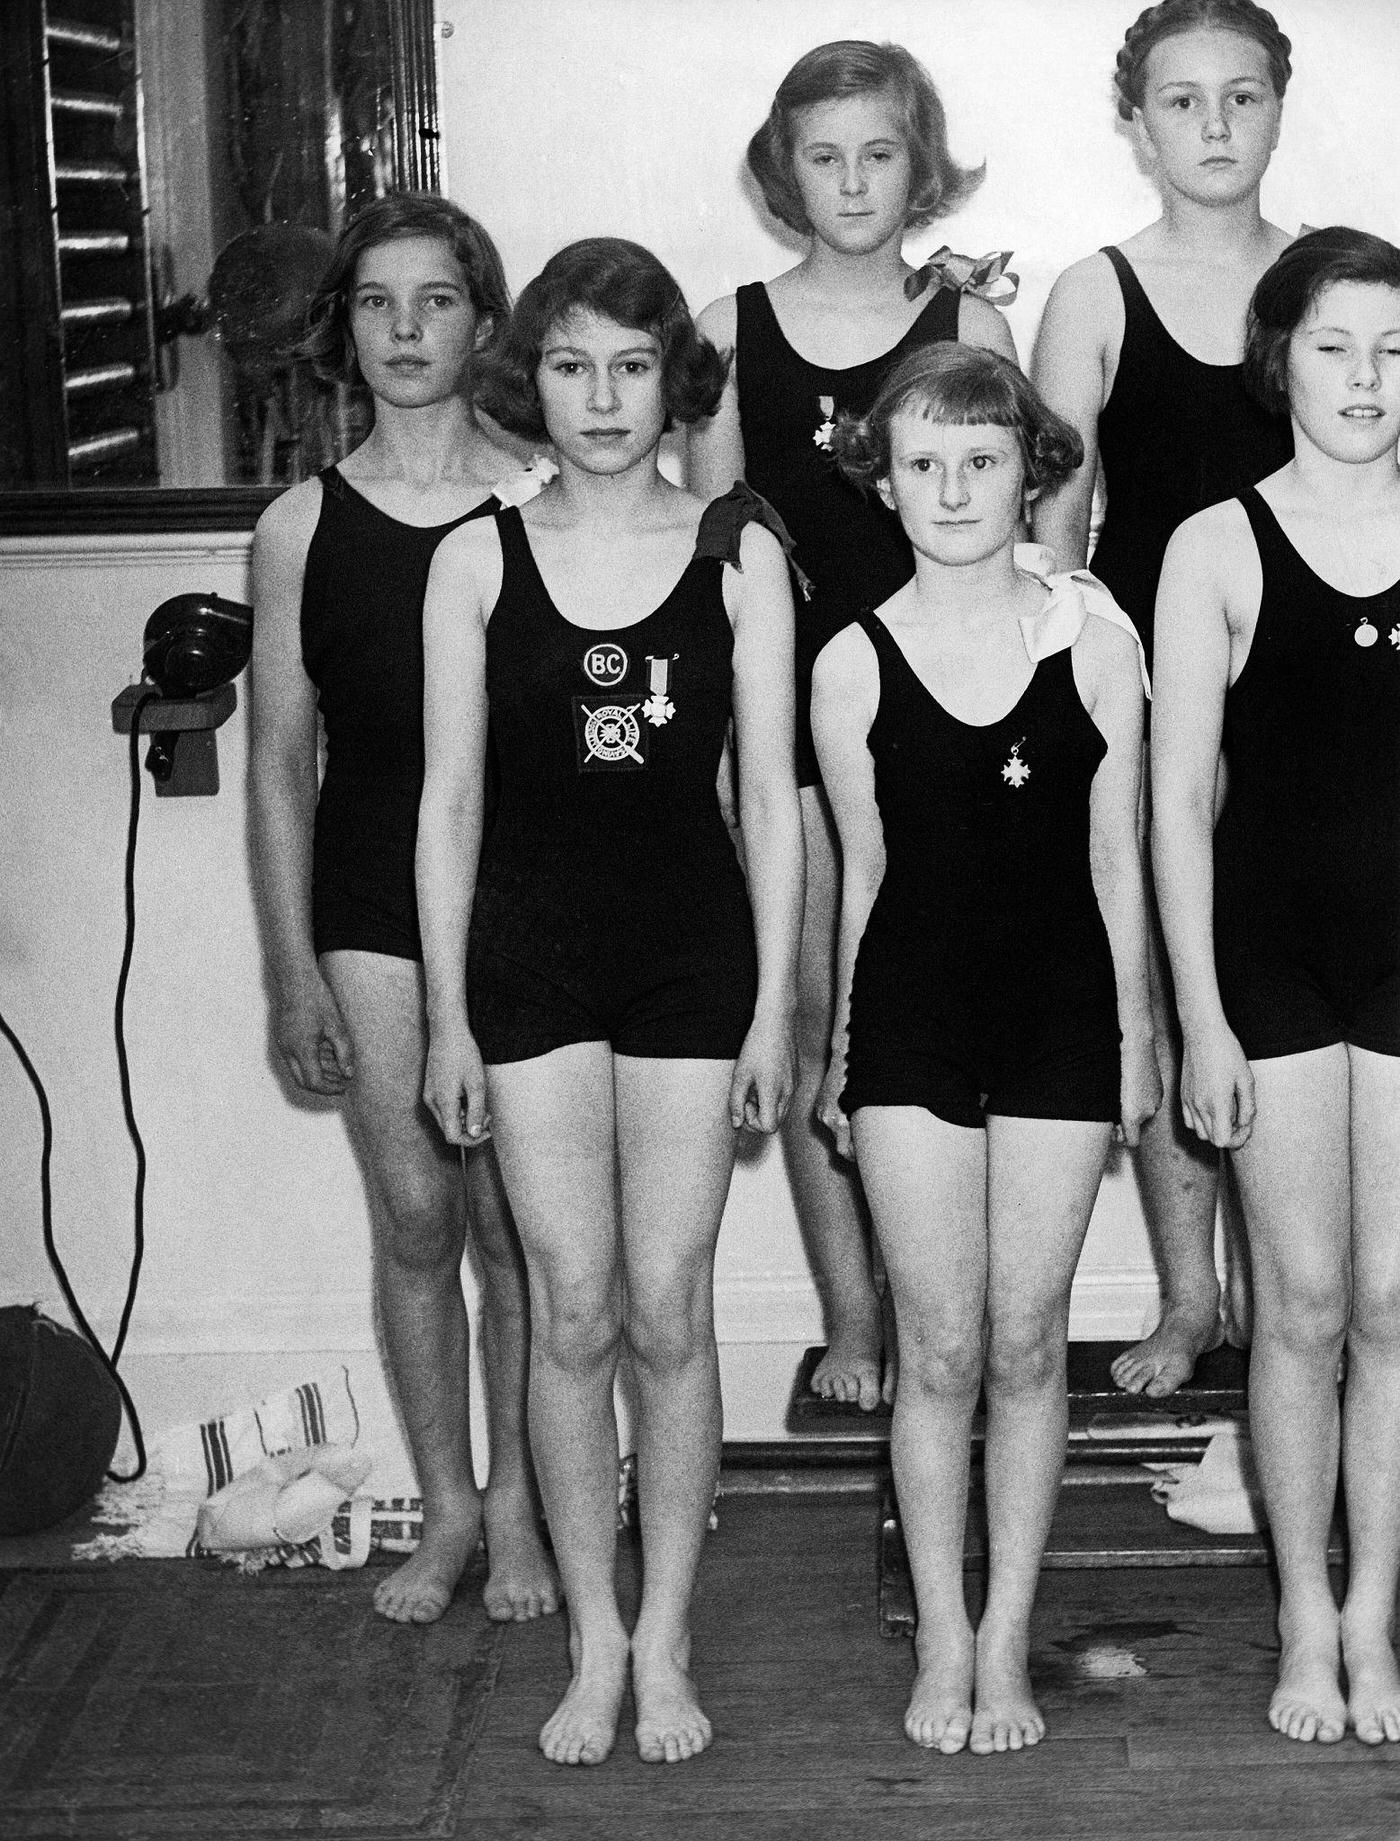 Elizabeth II, won a children's swimming competition in London with 35 points in 1939.